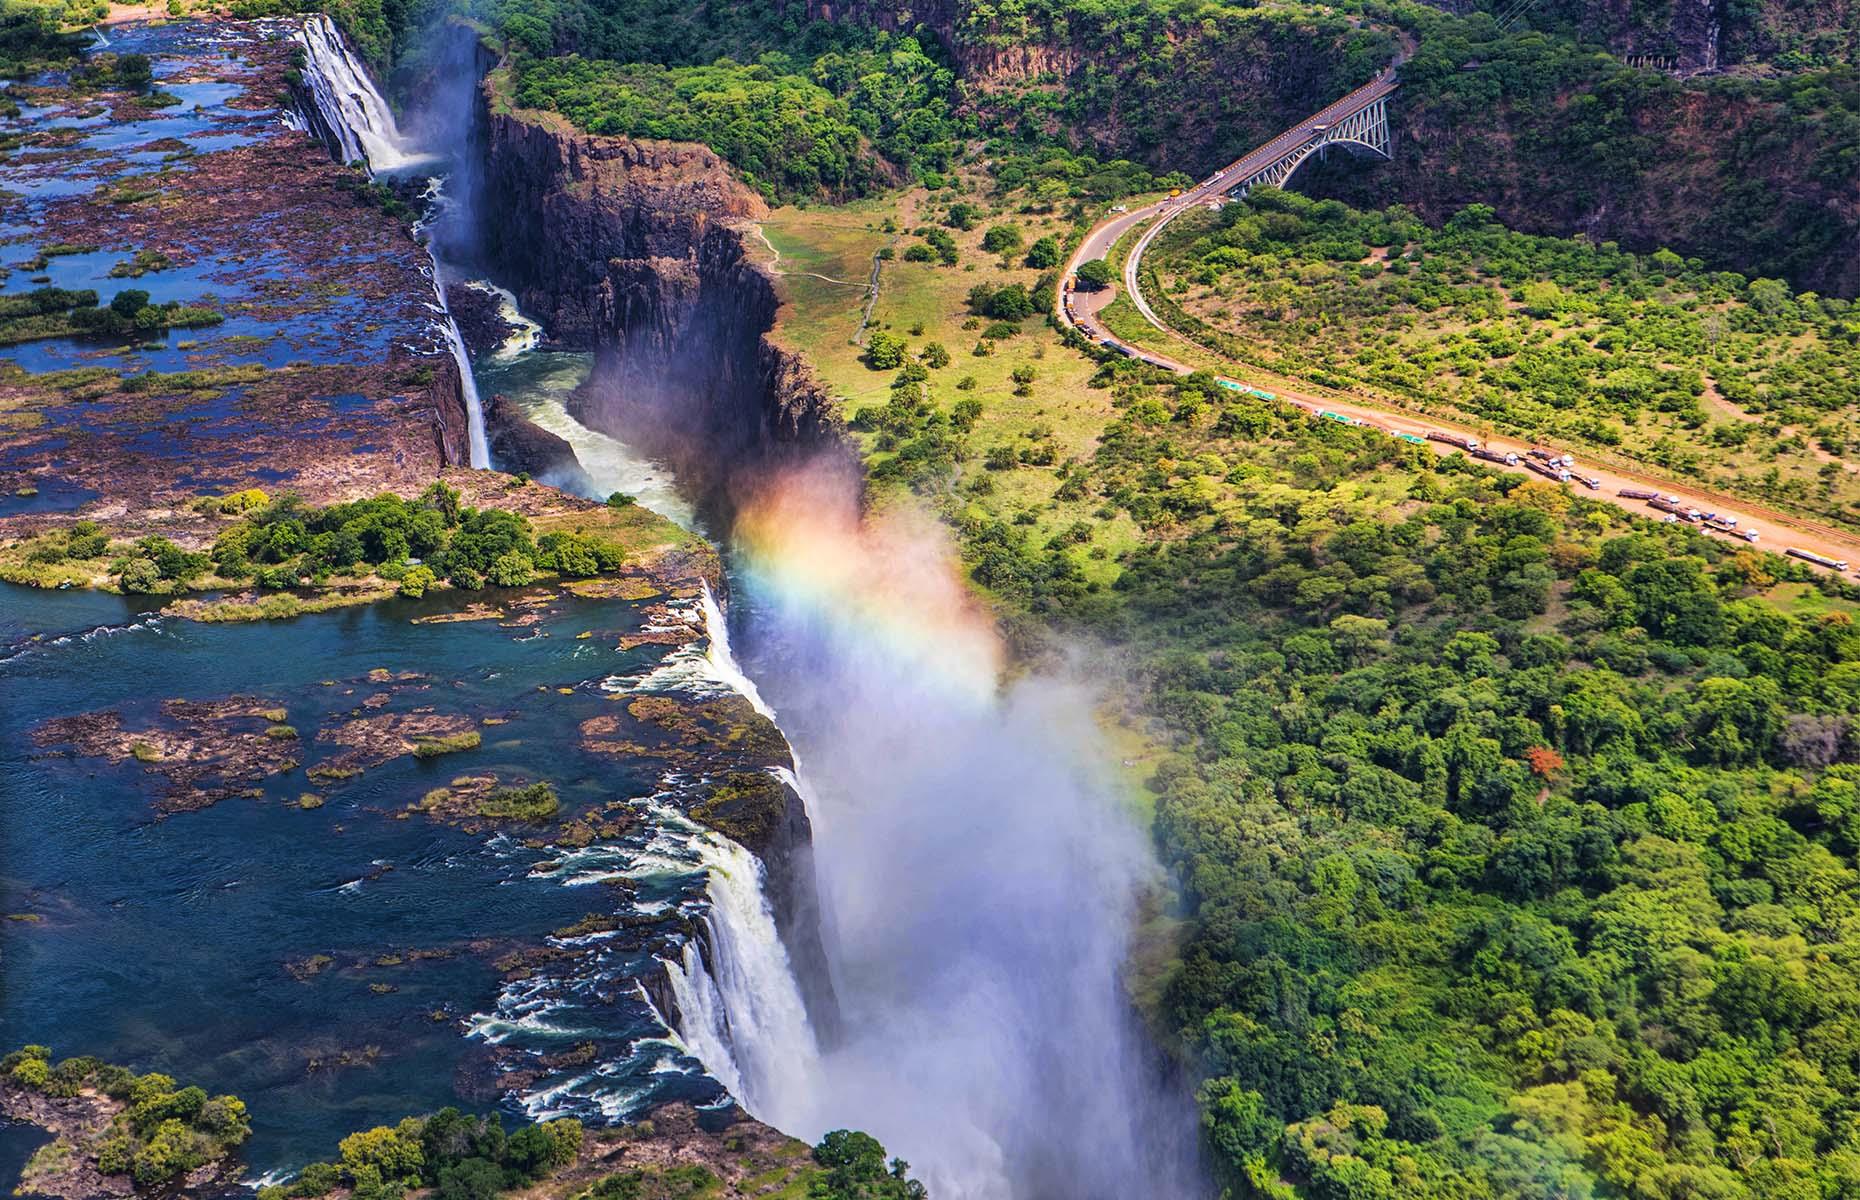 <p>However you look at it, this huge, thundering waterfall on the Zambezi River is pretty incredible. Straddling Zimbabwe and Zambia, with cascades more than 5,500-feet (1,700m) wide and 355-feet (108m) tall, it’s one of the world’s largest waterfalls. It’s also among the loudest, making such a racket and creating such a cloud of mist that the Kalolo-Lozi people named it Mosi-oa-Tunya, or The Smoke That Thunders.</p>  <p><a href="https://www.loveexploring.com/galleries/76836/these-are-the-worlds-most-beautiful-waterfalls?page=1"><strong>Here are more of the world's most beautiful waterfalls</strong></a></p>